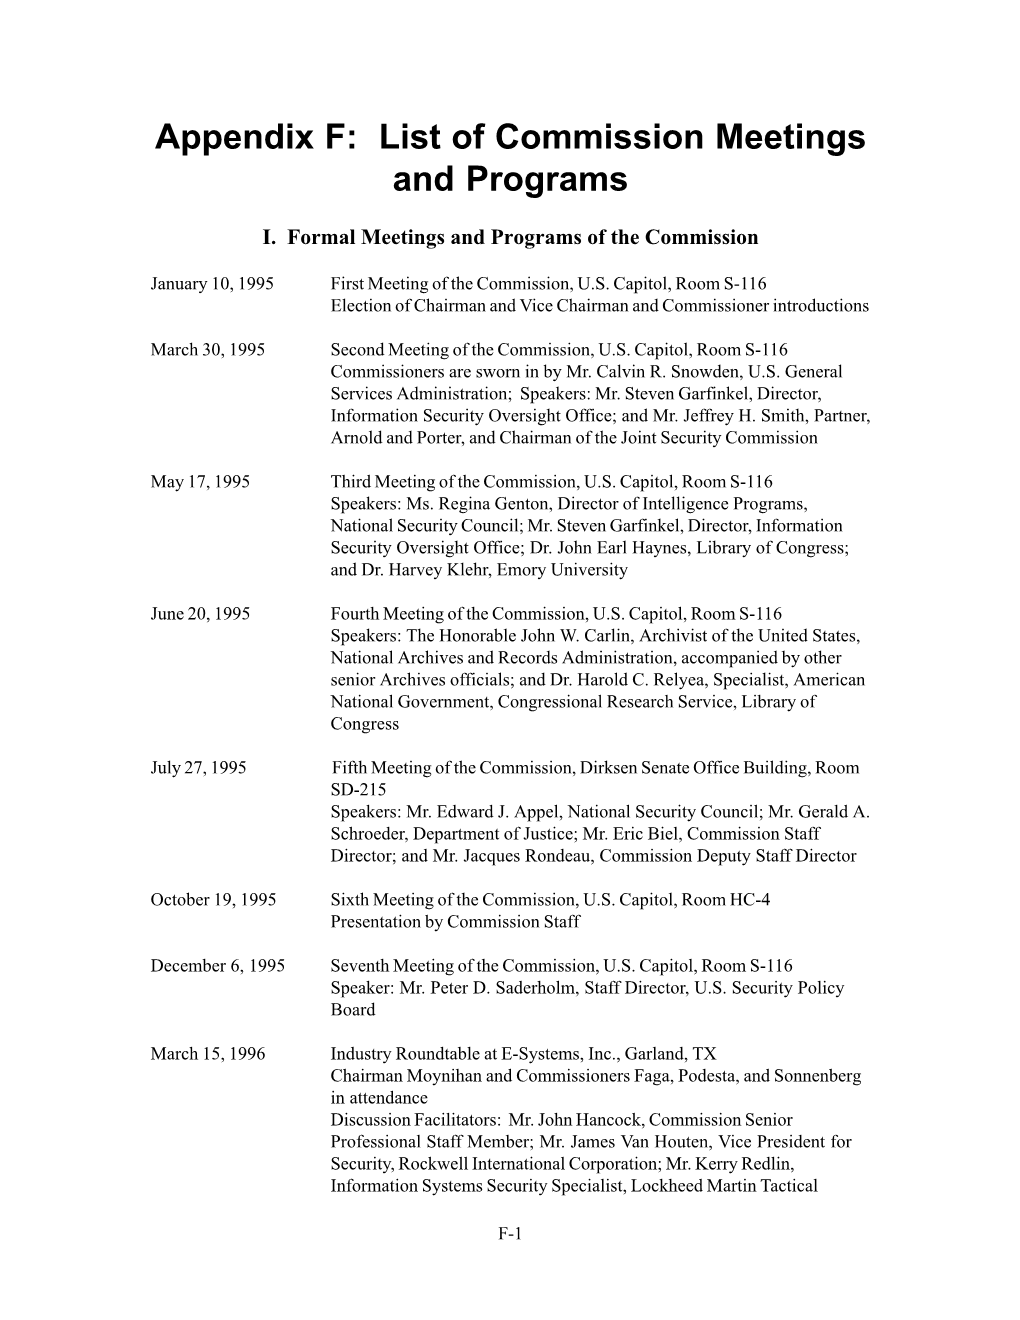 Appendix F: List of Commission Meetings and Programs